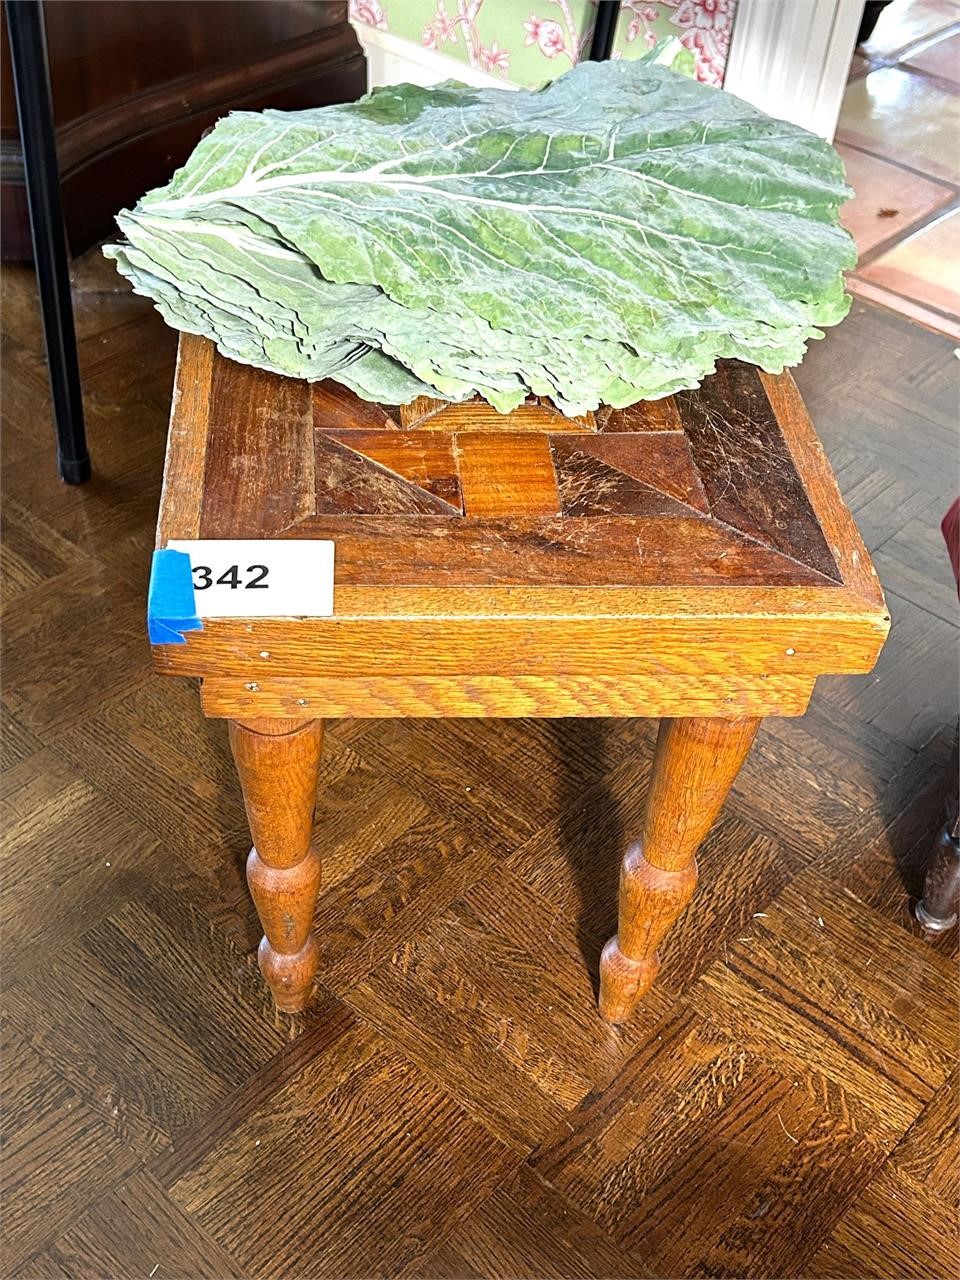 Handmade Footstool & Cabbage Leaf Placemats